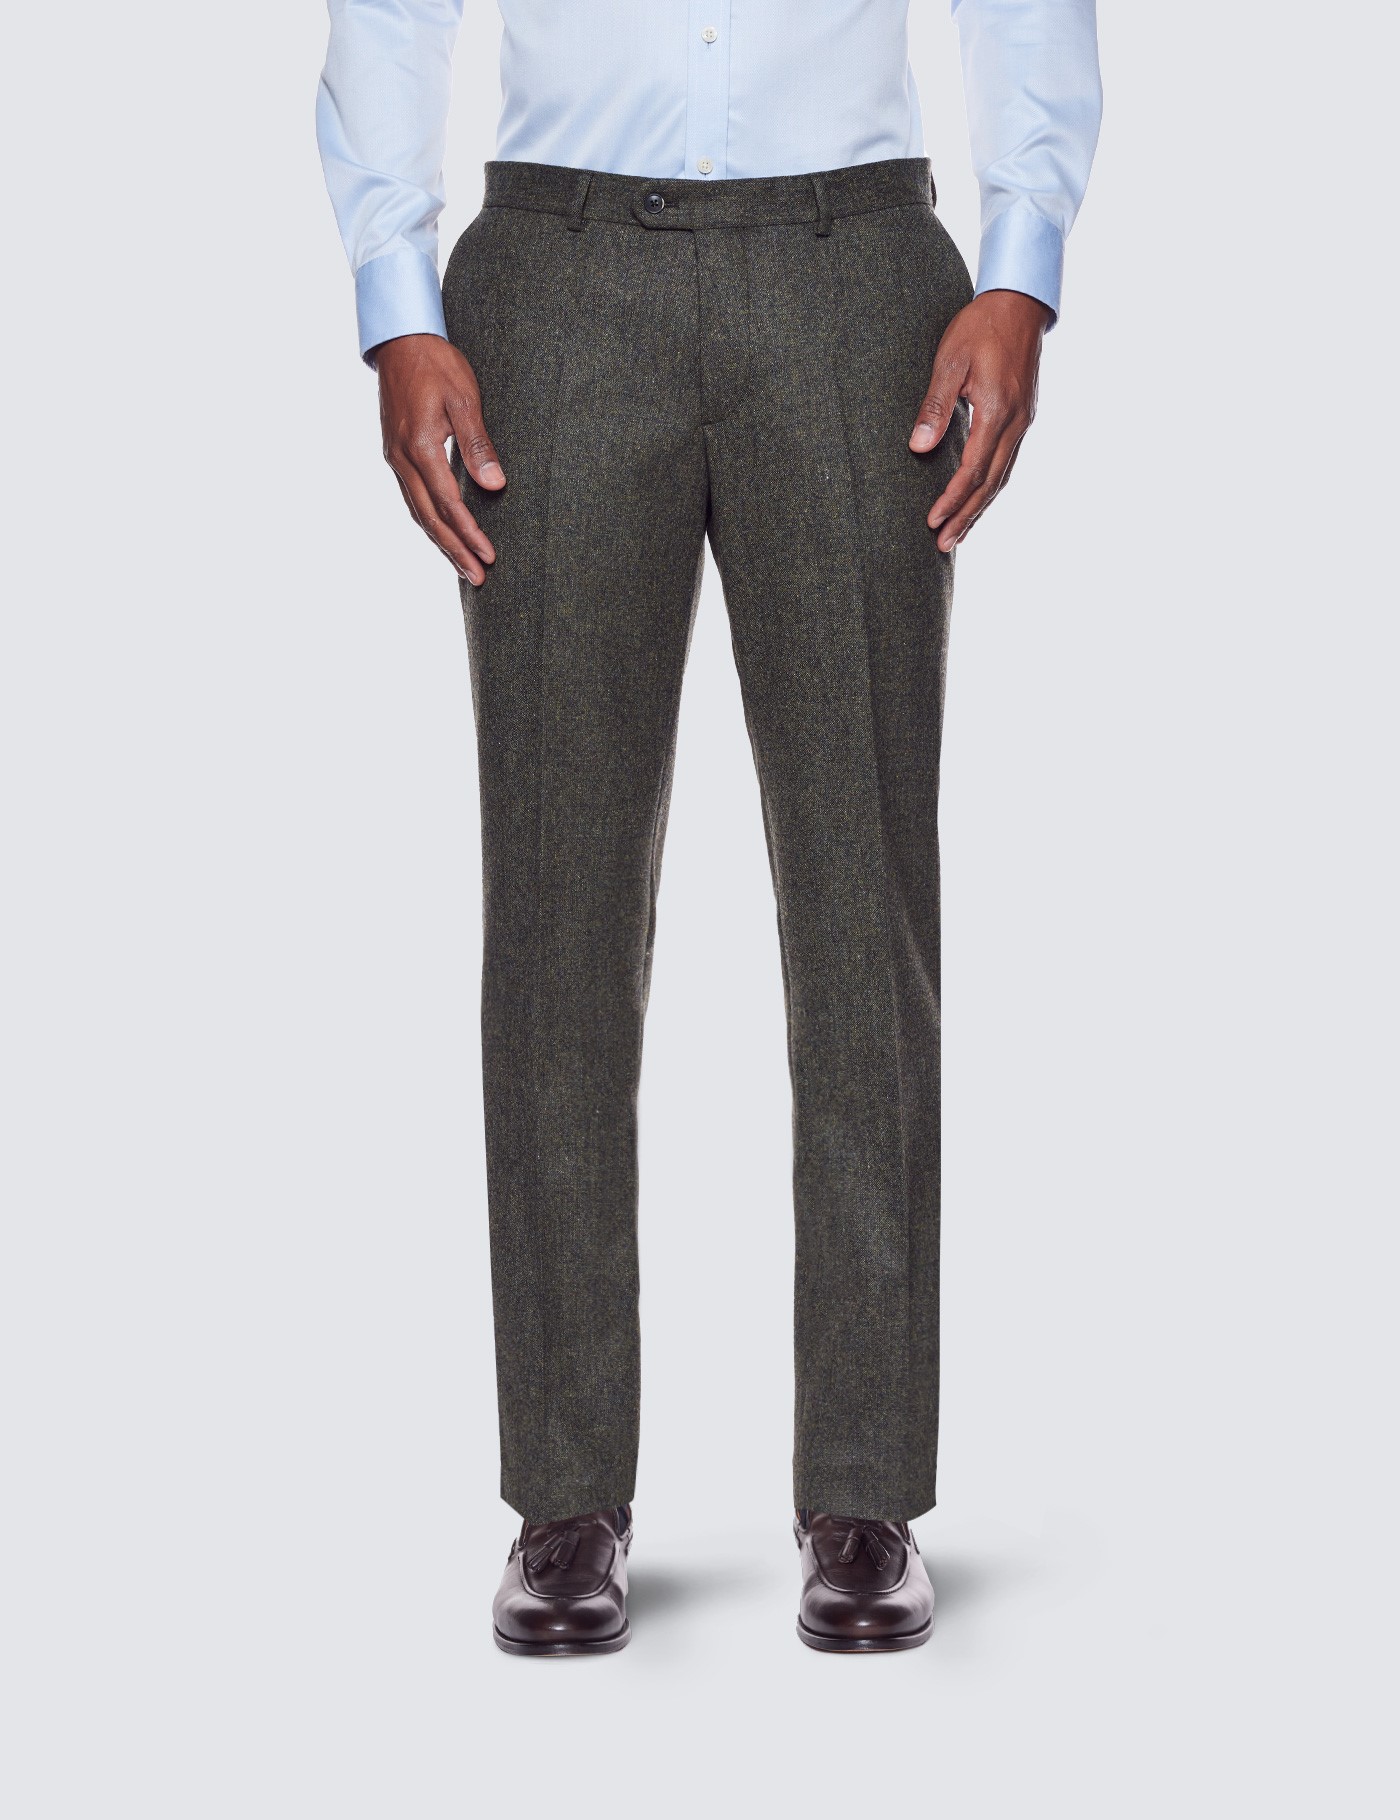 Men's Green Tweed Slim Fit Suit Trousers - 1913 Collection